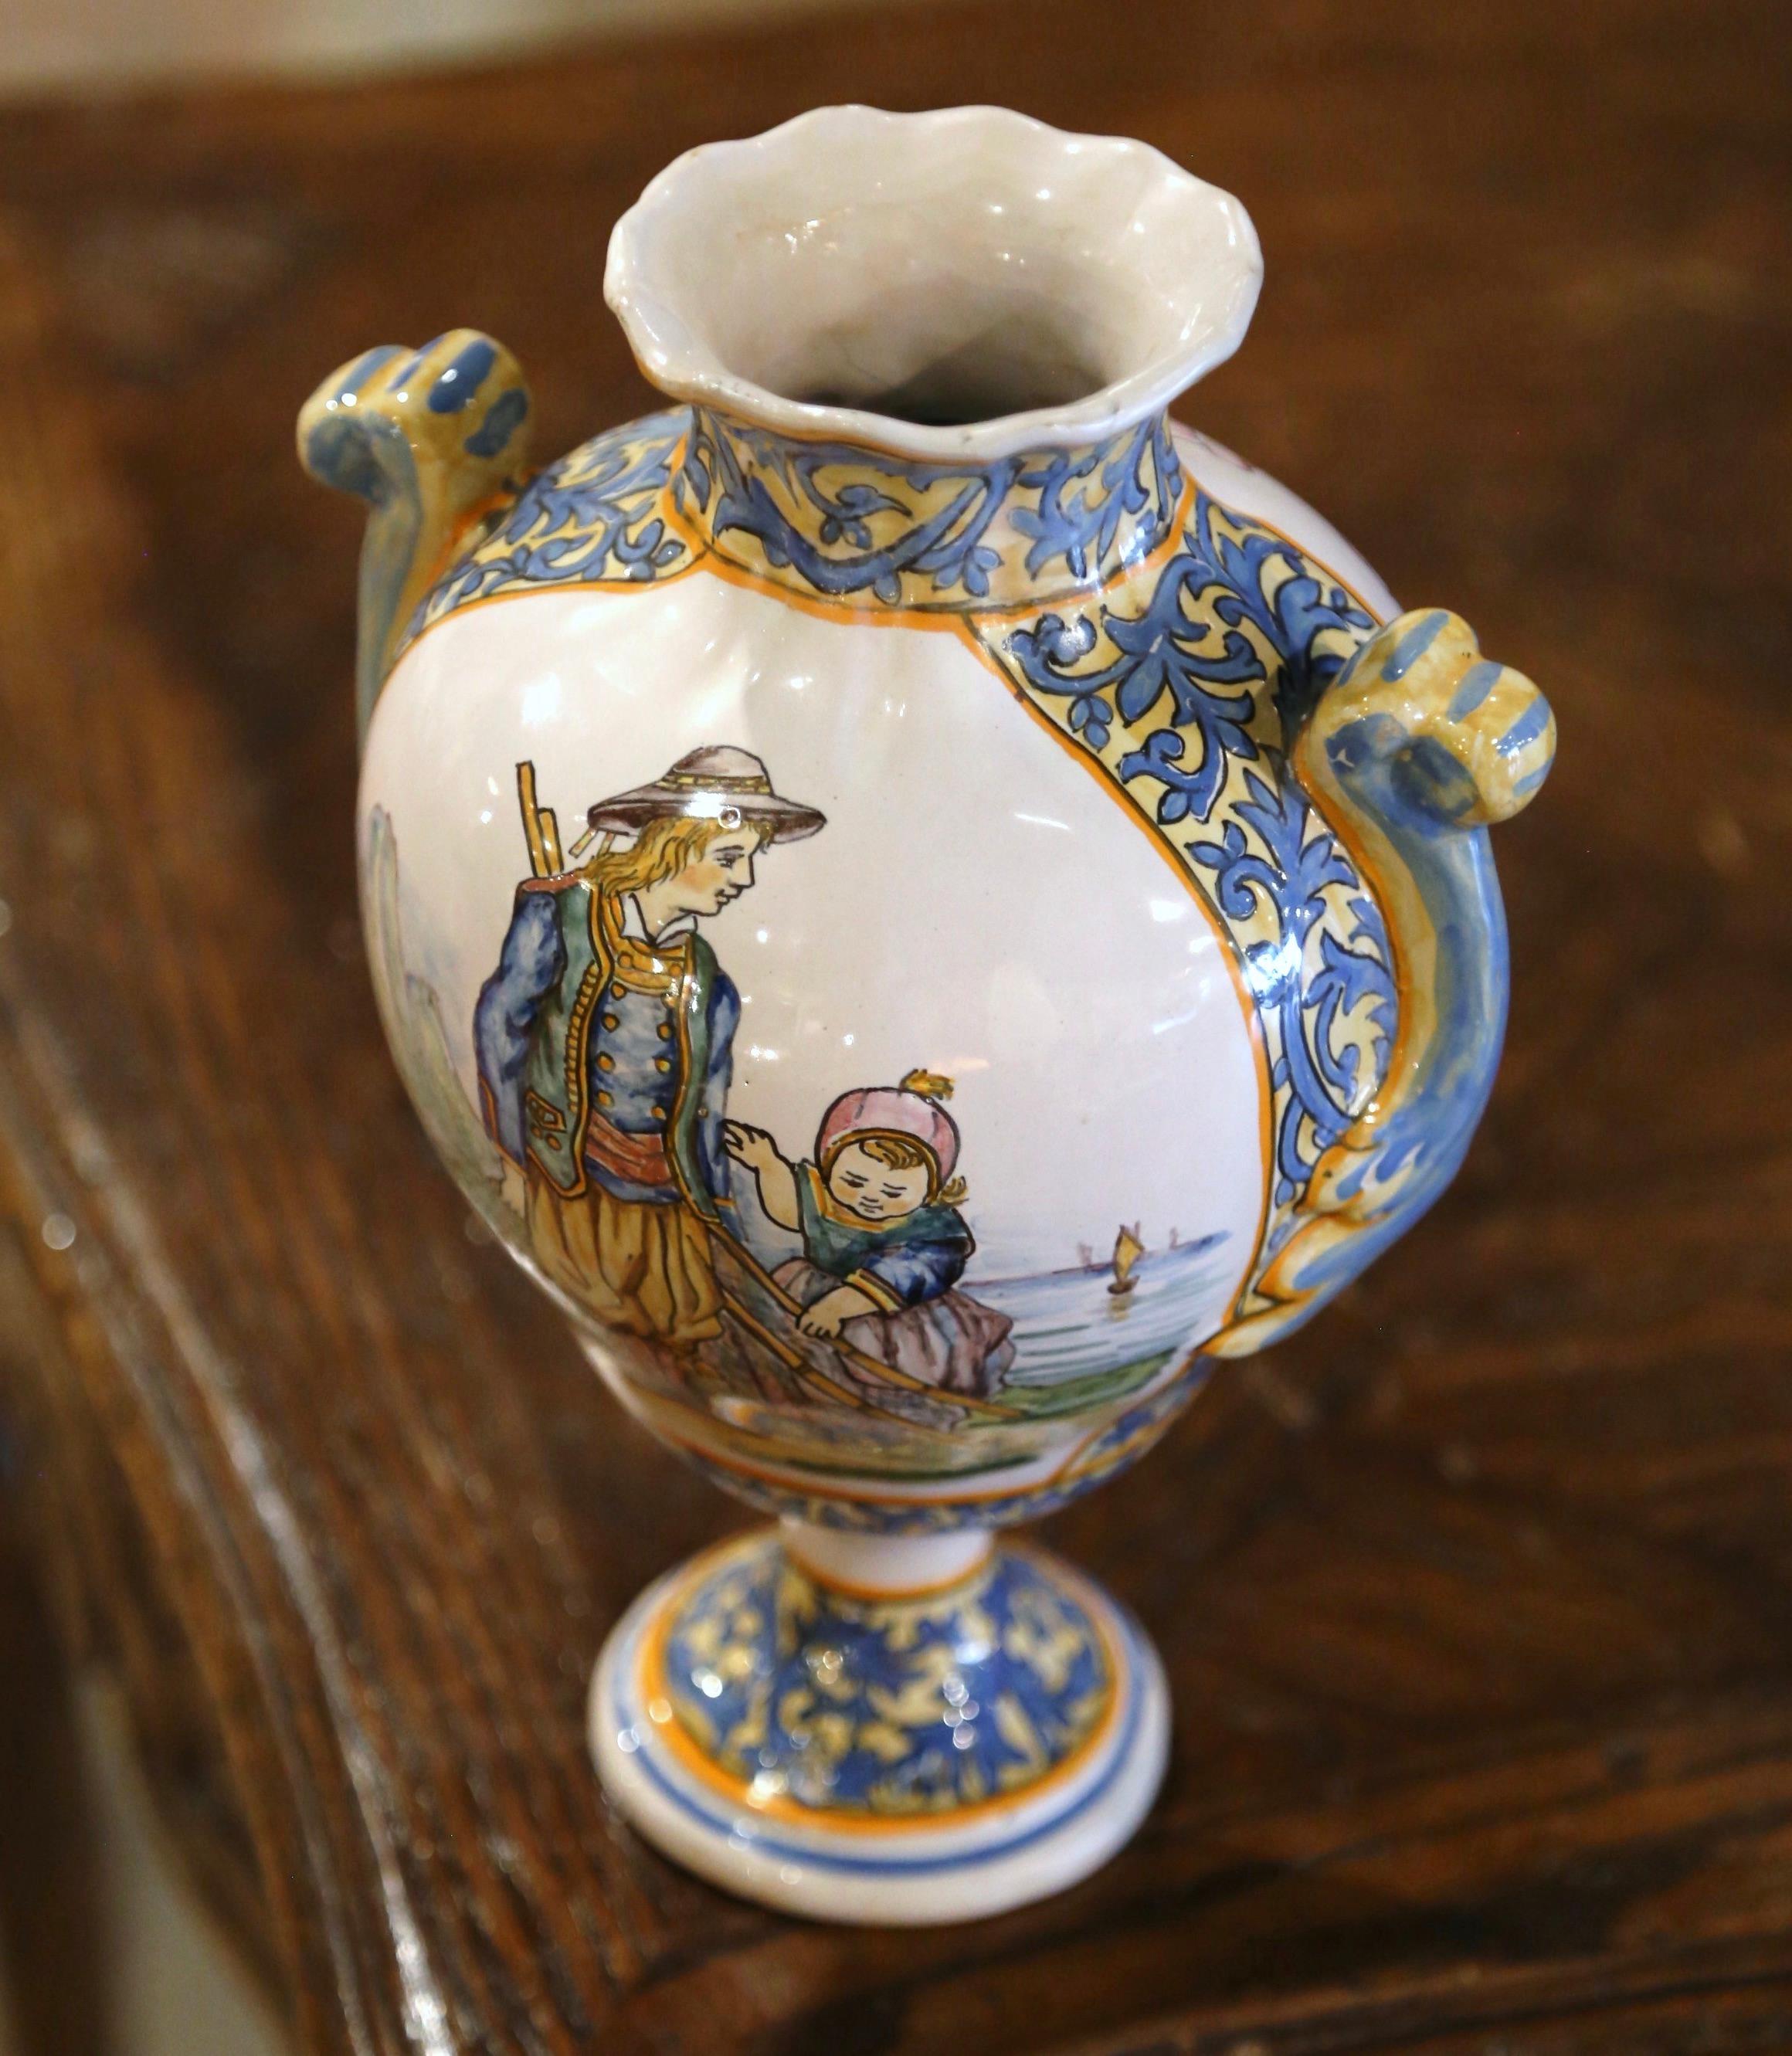 Created in Brittany, France circa 1895, the hand painted faience vase is round in shape with scalloped edges at the rim. The vessel with side handles is decorated at the center with a Breton and his kid going fishing, and dressed in traditional